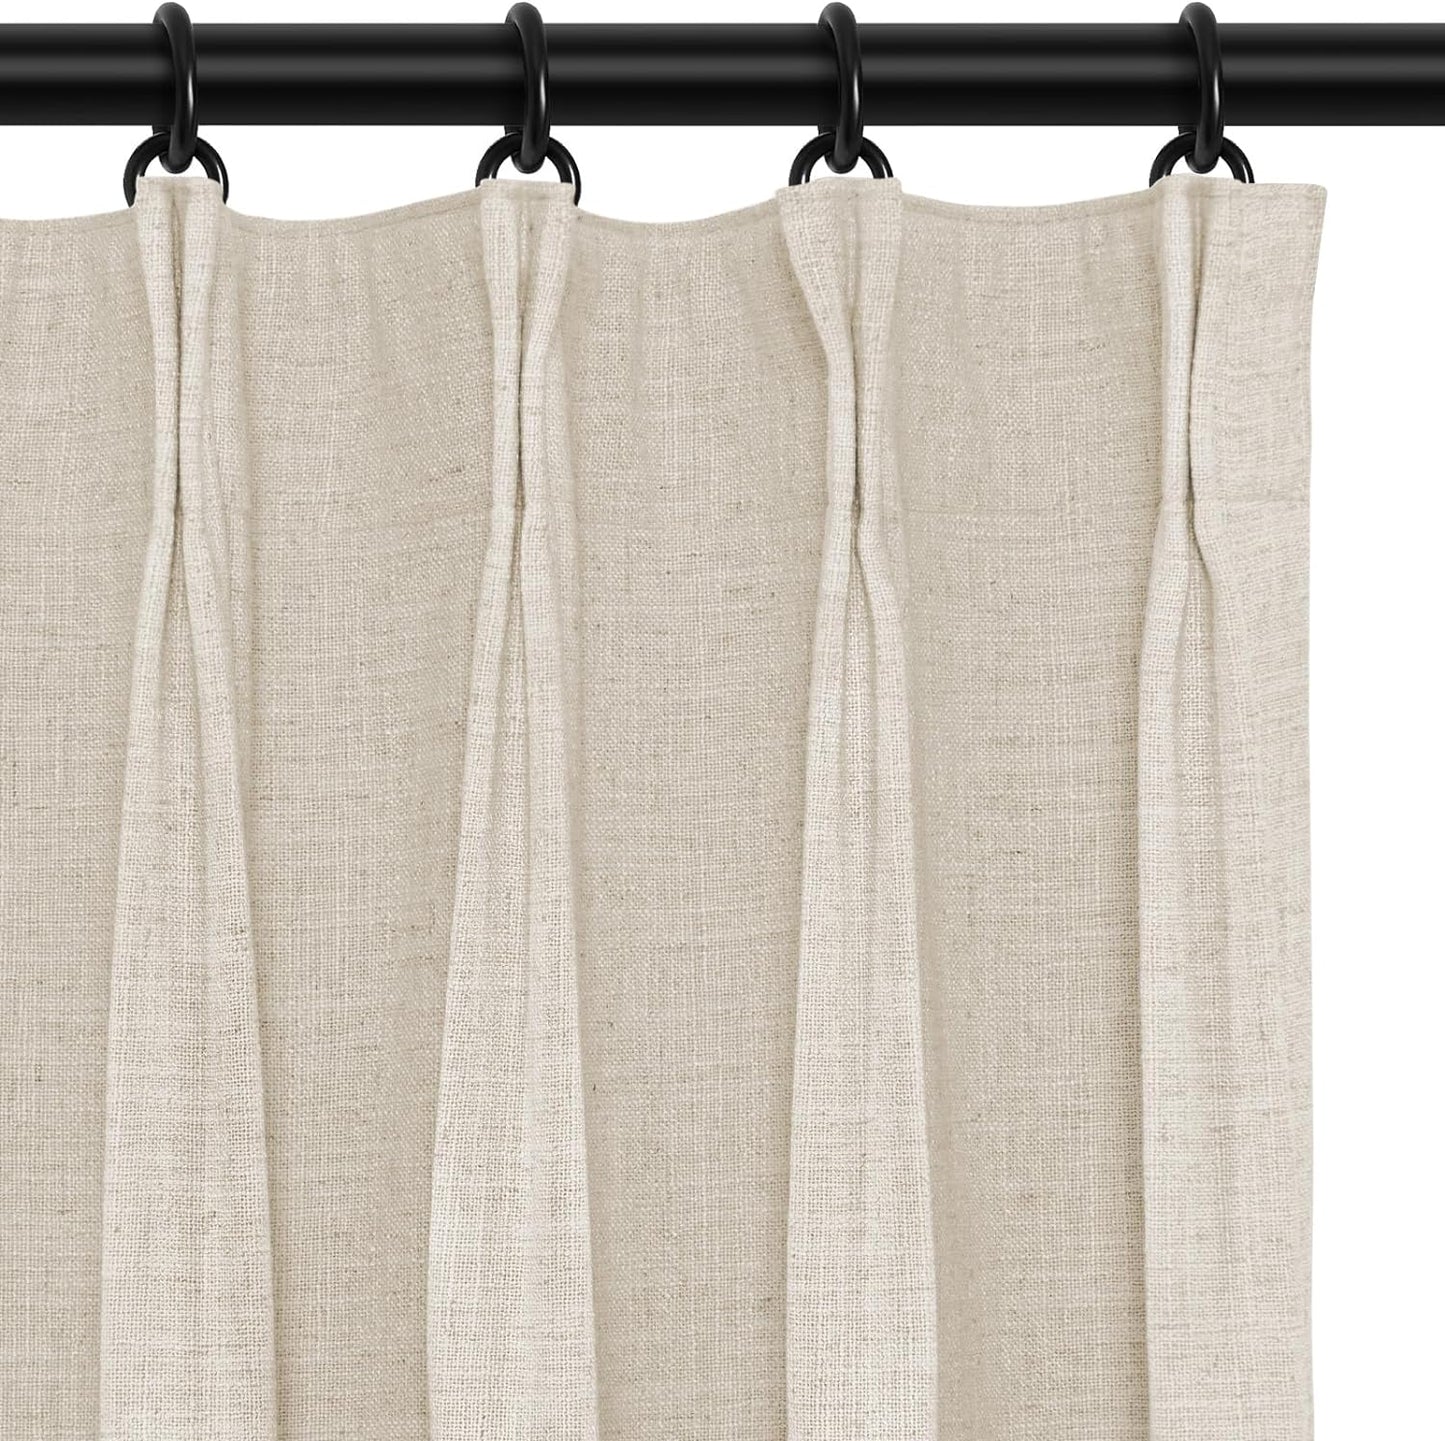 INOVADAY 100% Blackout Curtains for Bedroom, Pinch Pleated Linen Blackout Curtains 96 Inch Length 2 Panels Set, Thermal Room Darkening Linen Curtain Drapes for Living Room, W40 X L96,Beige White  INOVADAY Sand Beige 40"W X 84"L-2 Panels 